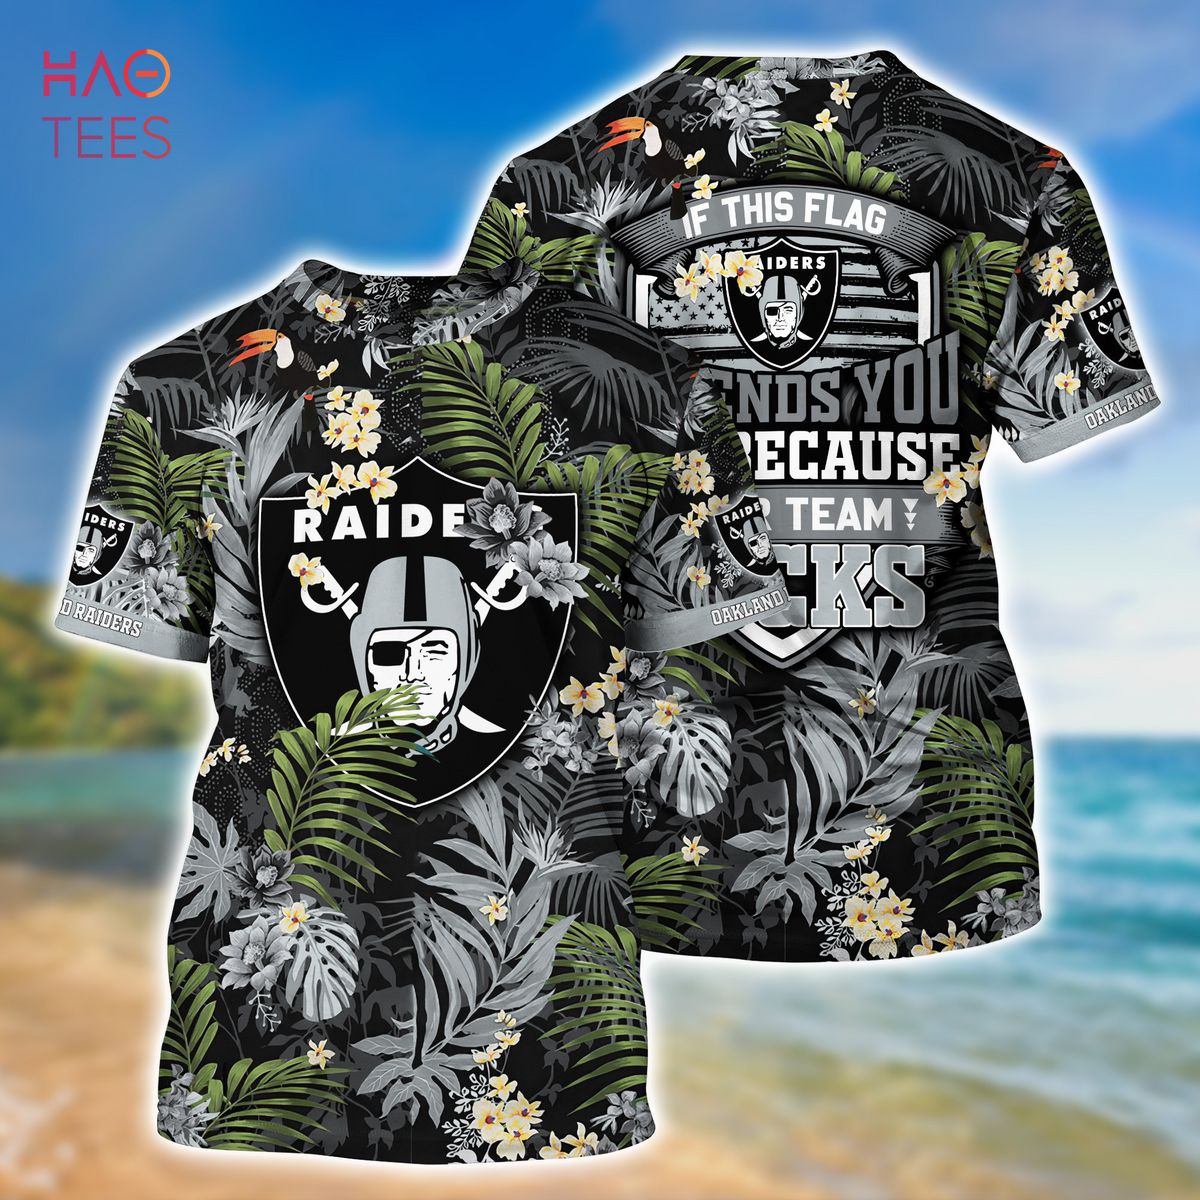 Oakland Athletics Logo And Yellow Flower Tropical Hawaiian Shirt For Fans -  Freedomdesign